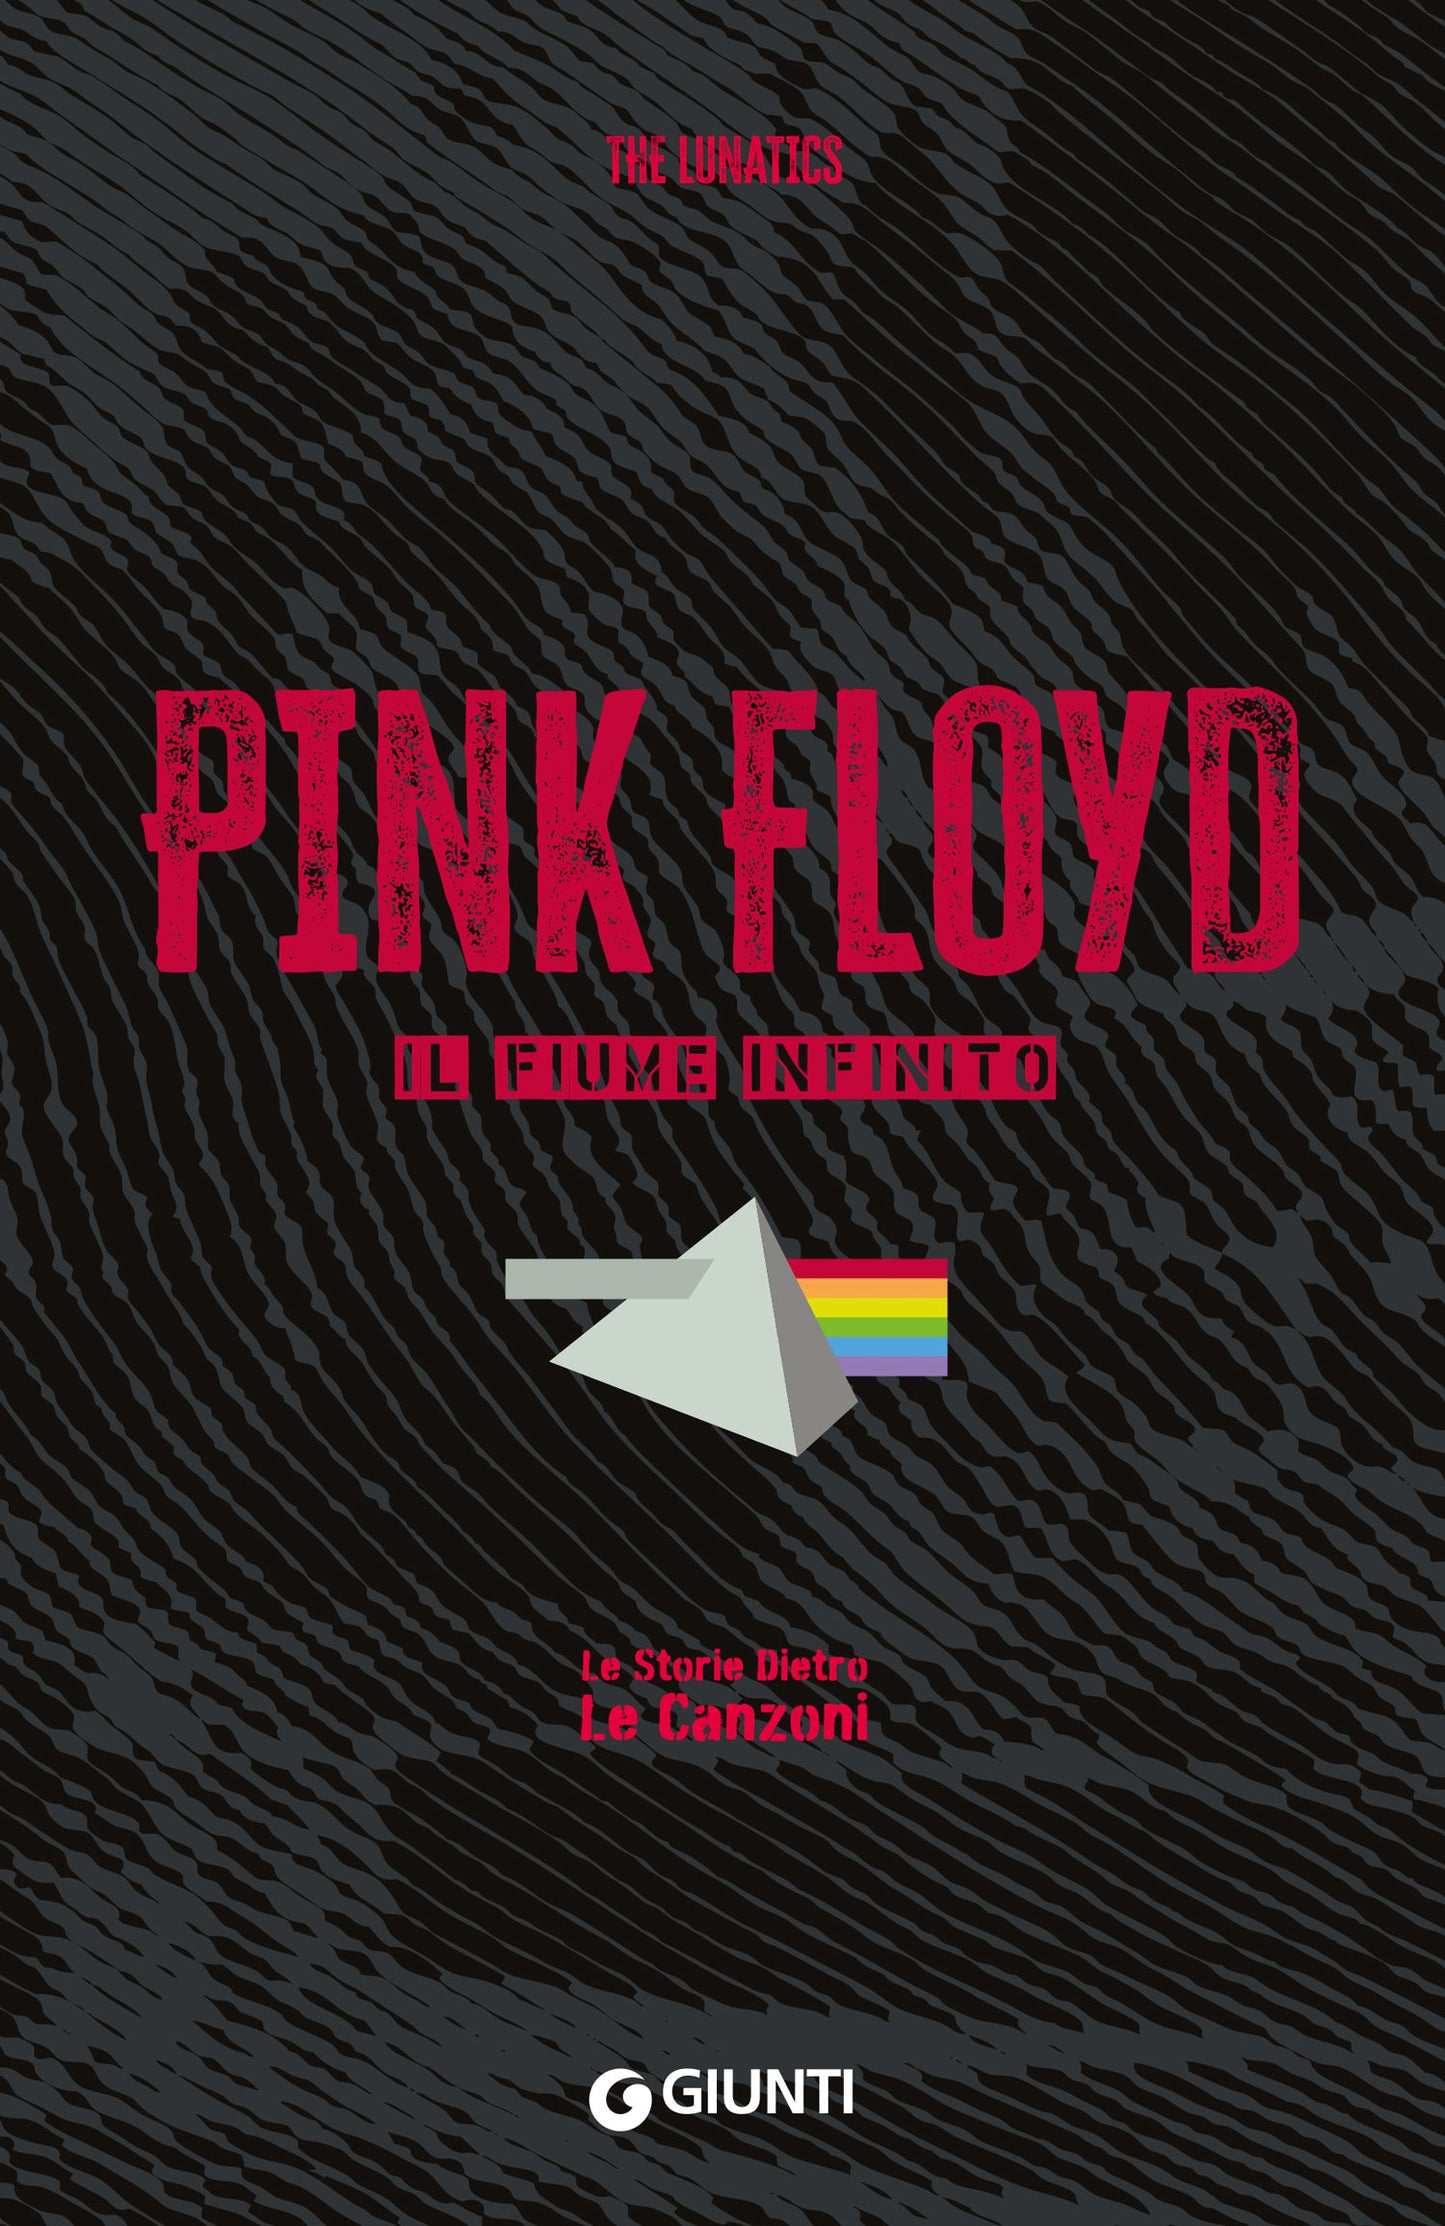 Pink Floyd::Il fiume infinito